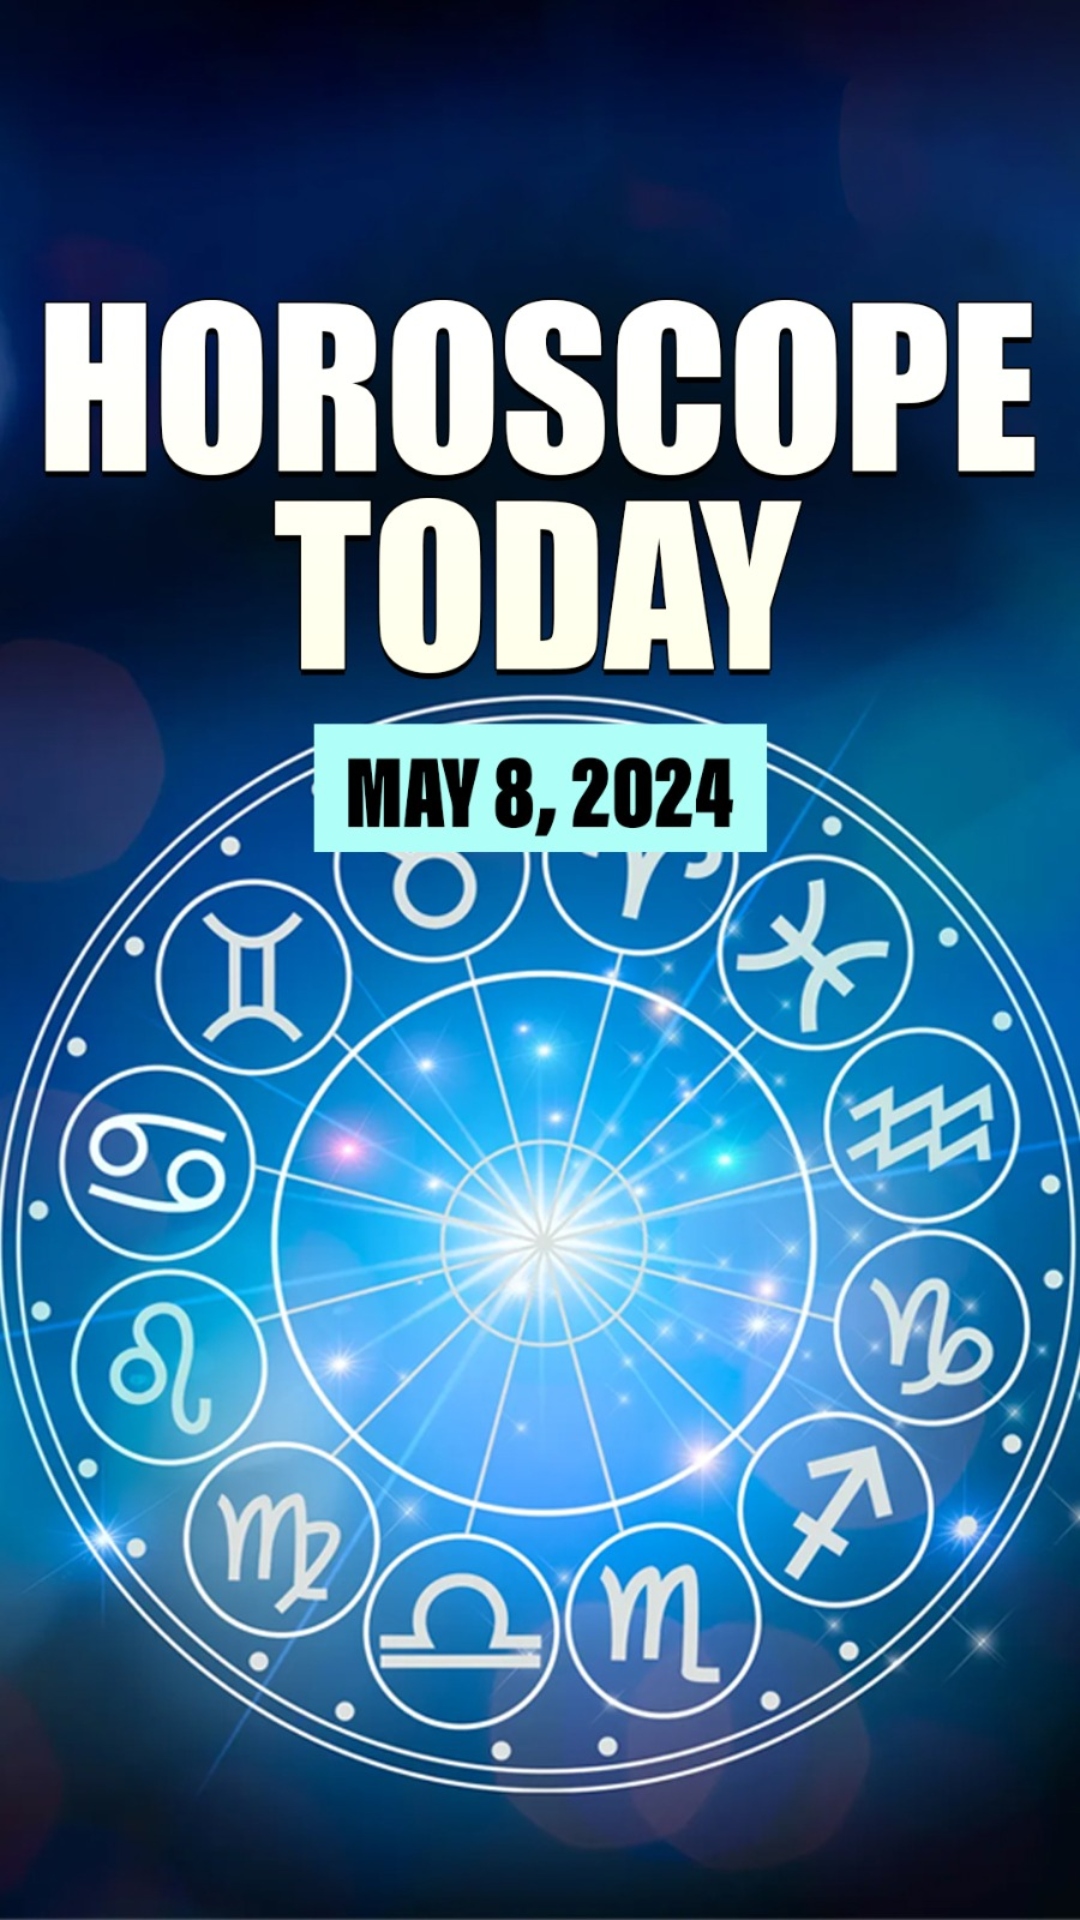 Know Lucky number and colour for all zodiac signs in your horoscope for May 8, 2024